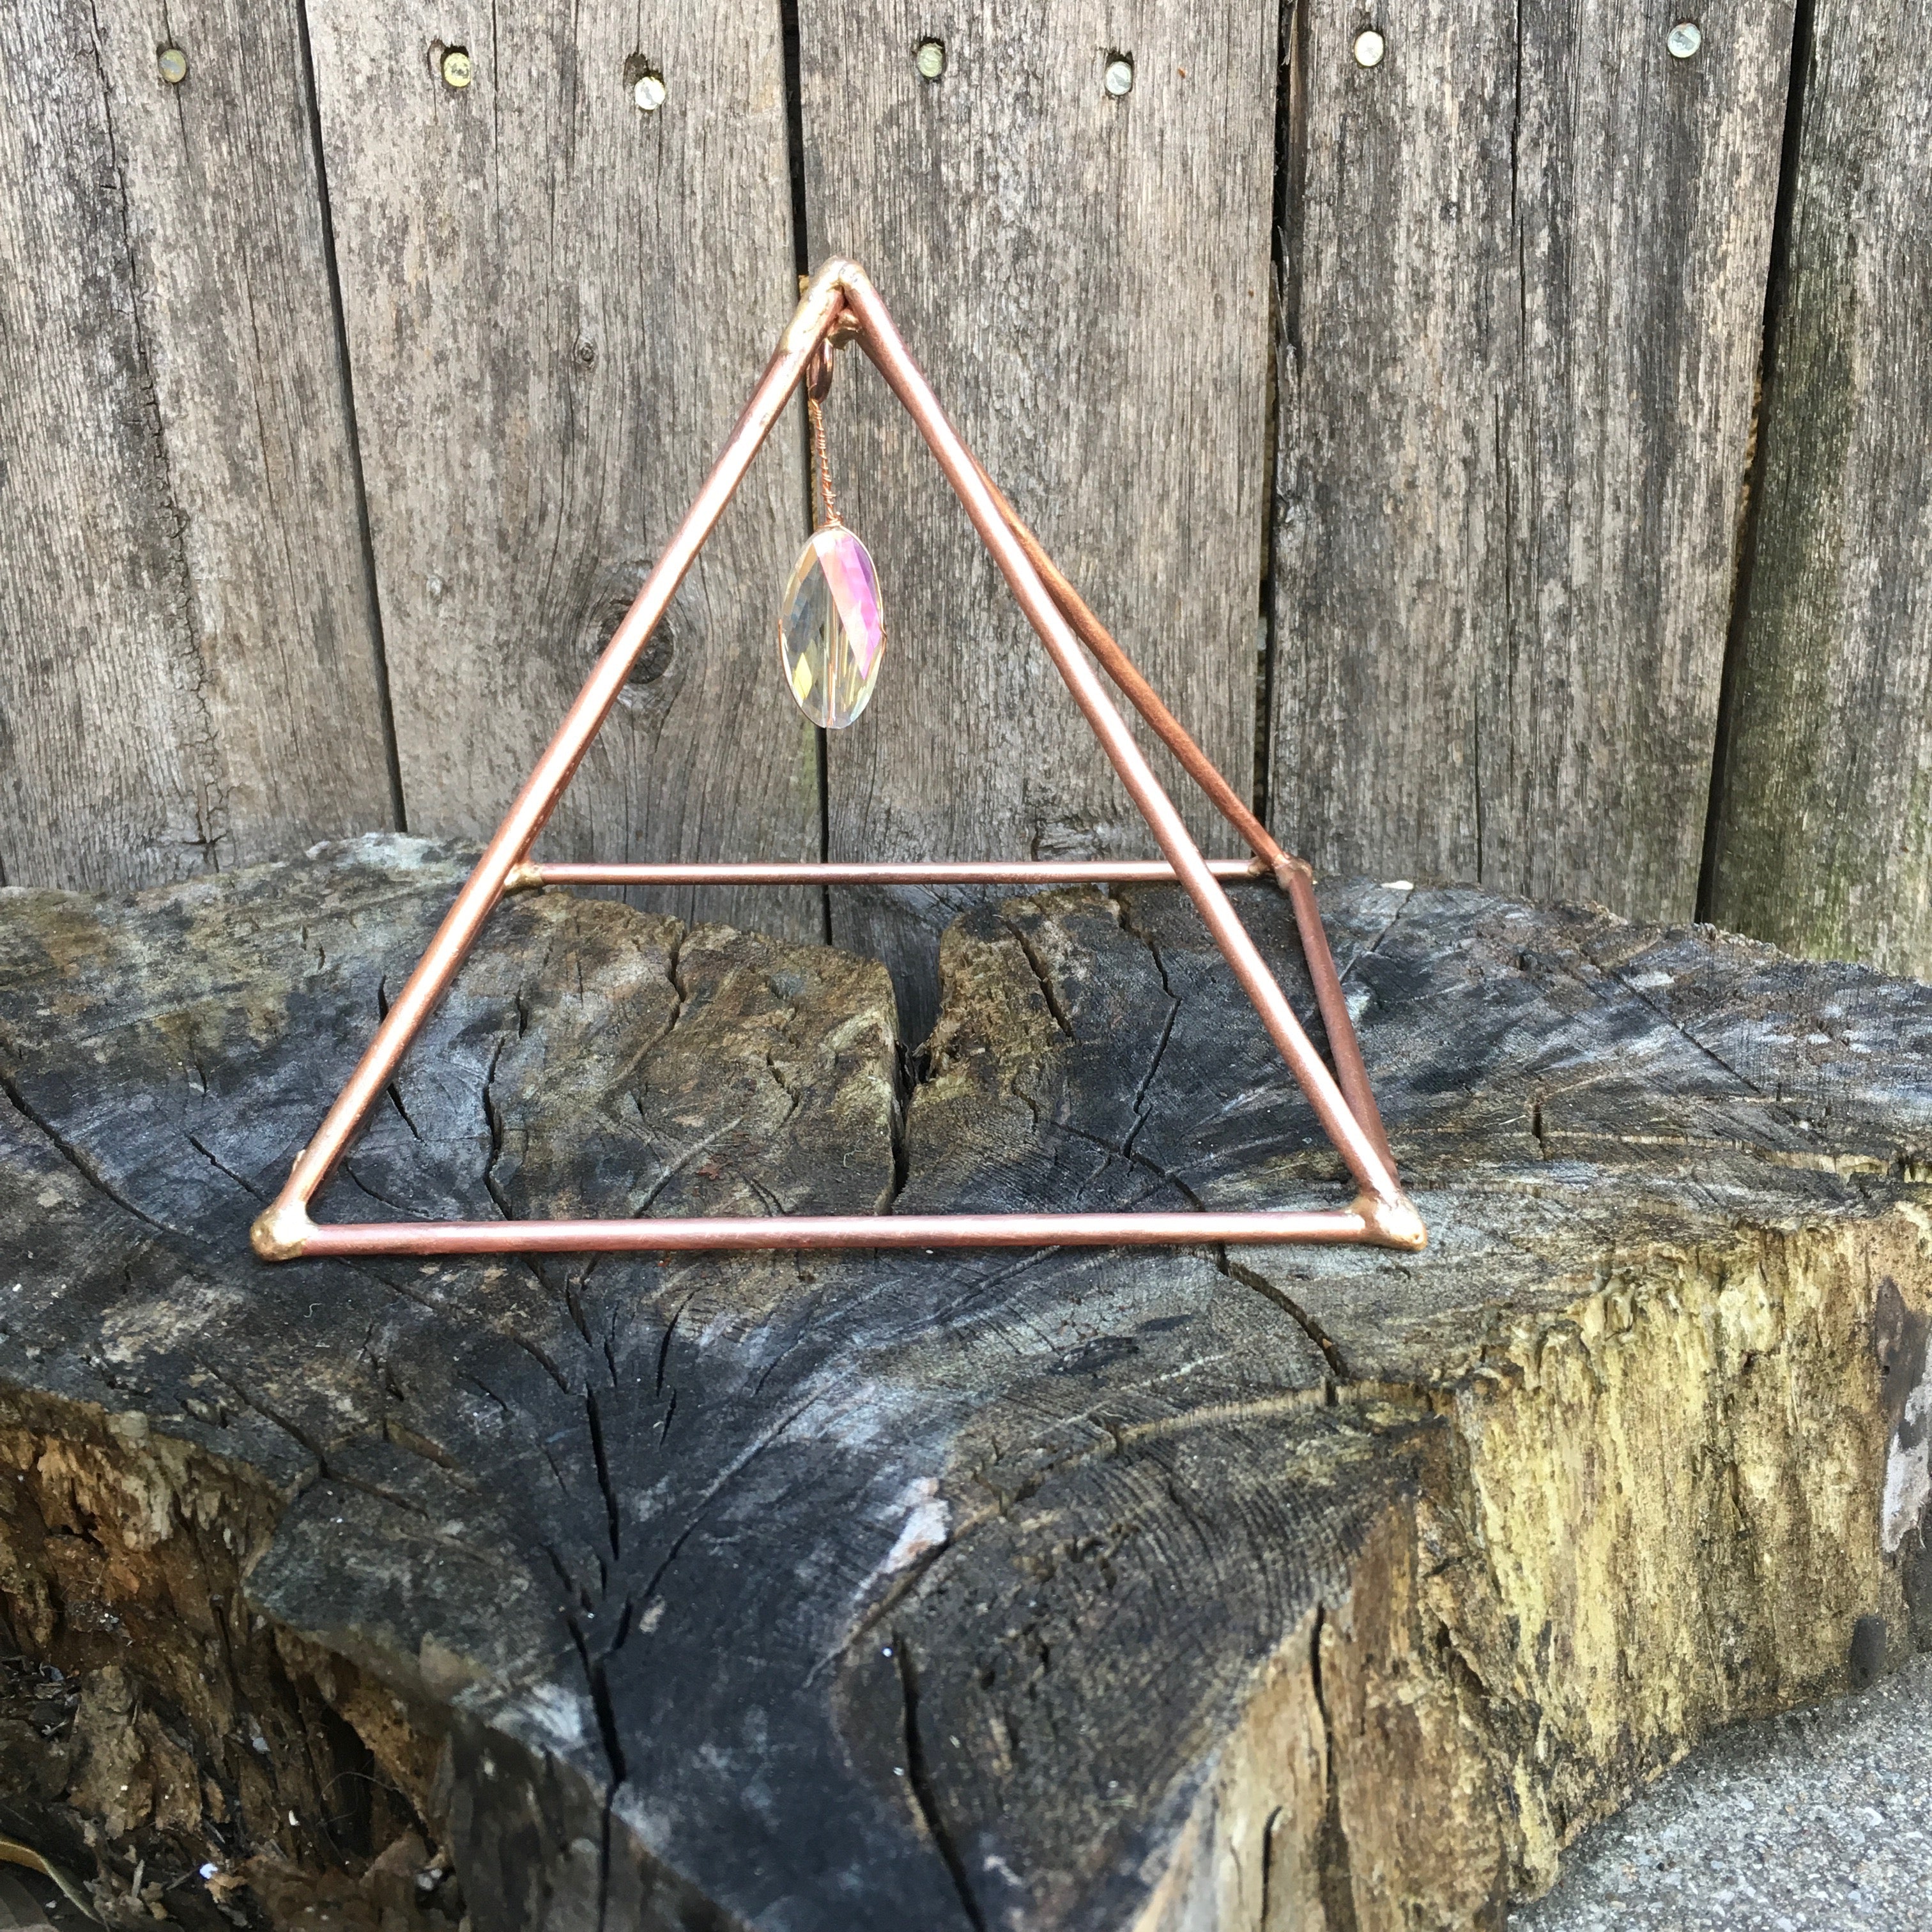 100% Solid Copper Pyramid 6 in Giza Shaped for Meditation, Body Healing, Reiki Balancing Chakras, Crystal Recharging, Focused Energy, Gold